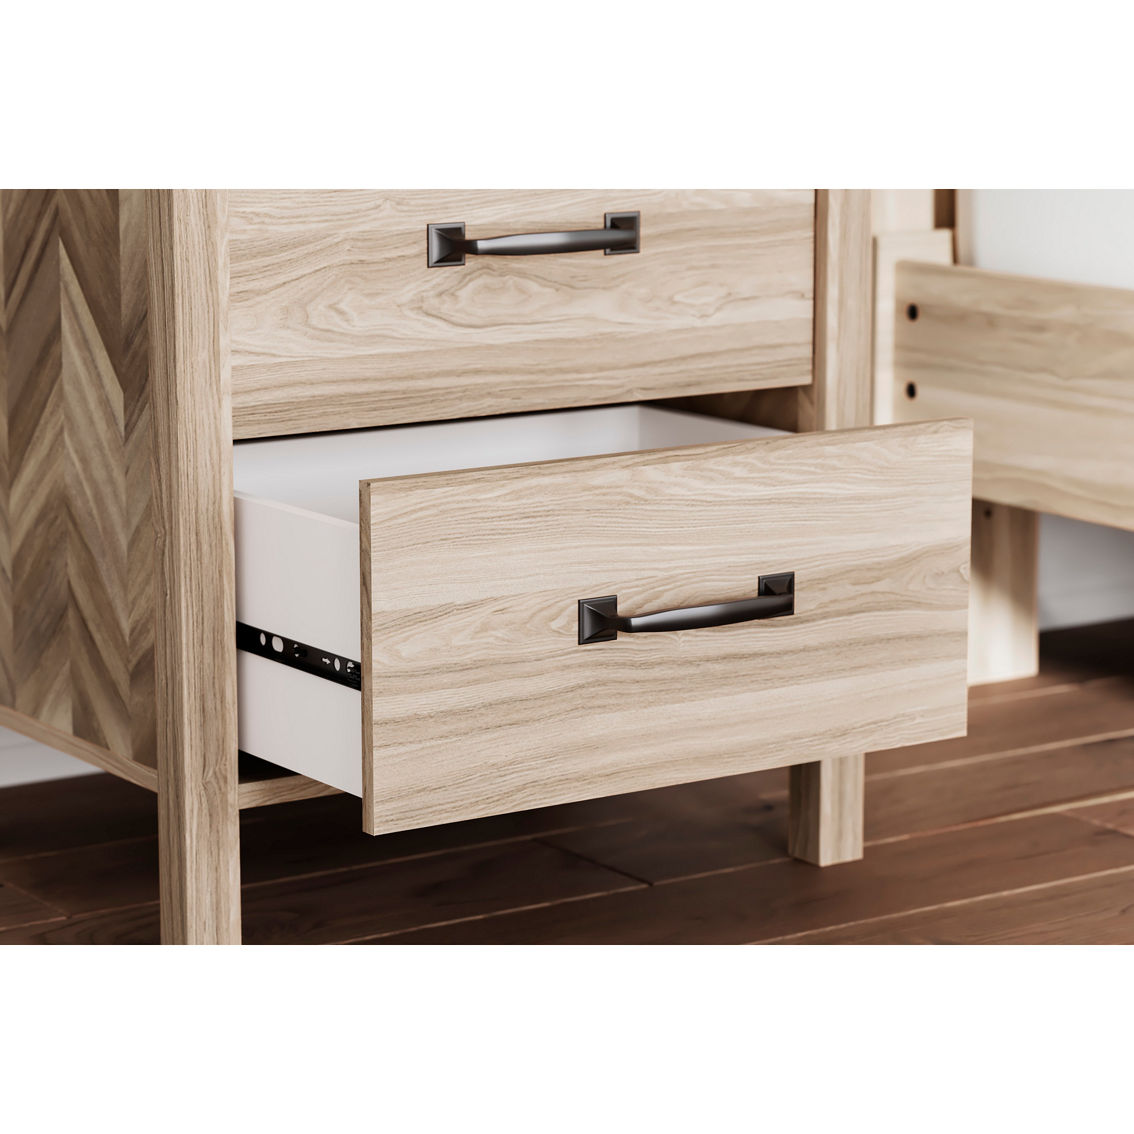 Signature Design by Ashley Battelle Ready-To-Assemble Nightstand - Image 5 of 7